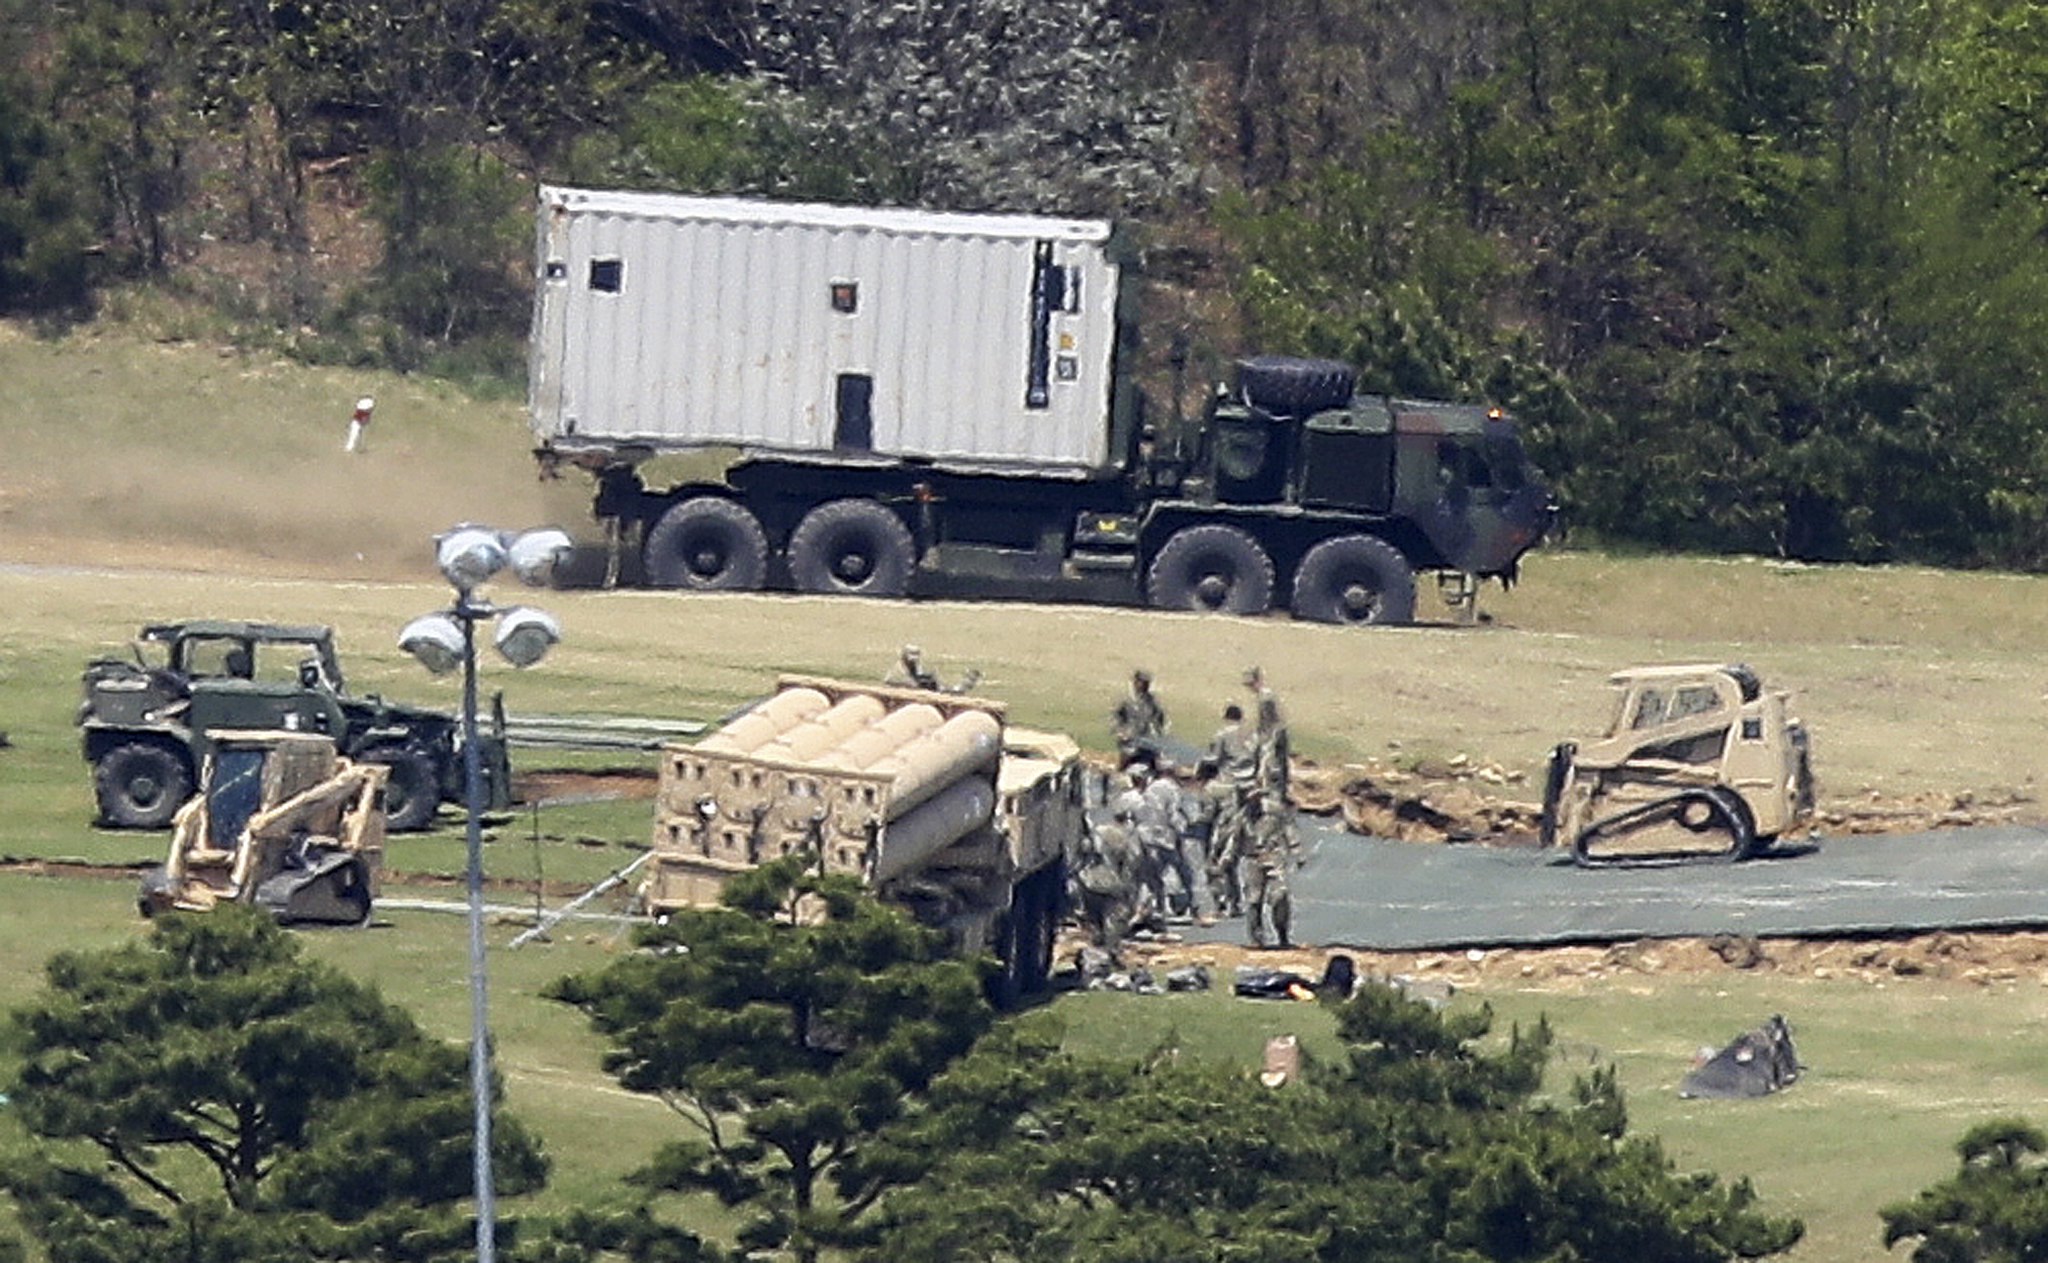 2017-04-27 17:37:41 epa05930237 An advanced US missile defense system, dubbed the Terminal High Altitude Area Defense (THAAD), is deployed in a golf course in the country's southeastern county of Seongju, South Korea, 27 April 2017. South Korea's defense ministry said on the day that the system will soon be put into 'actual operation' to counter North Korea's ballistic missile threats. EPA/YONHAP -- BEST QUALITY AVAILABLE -- SOUTH KOREA OUT